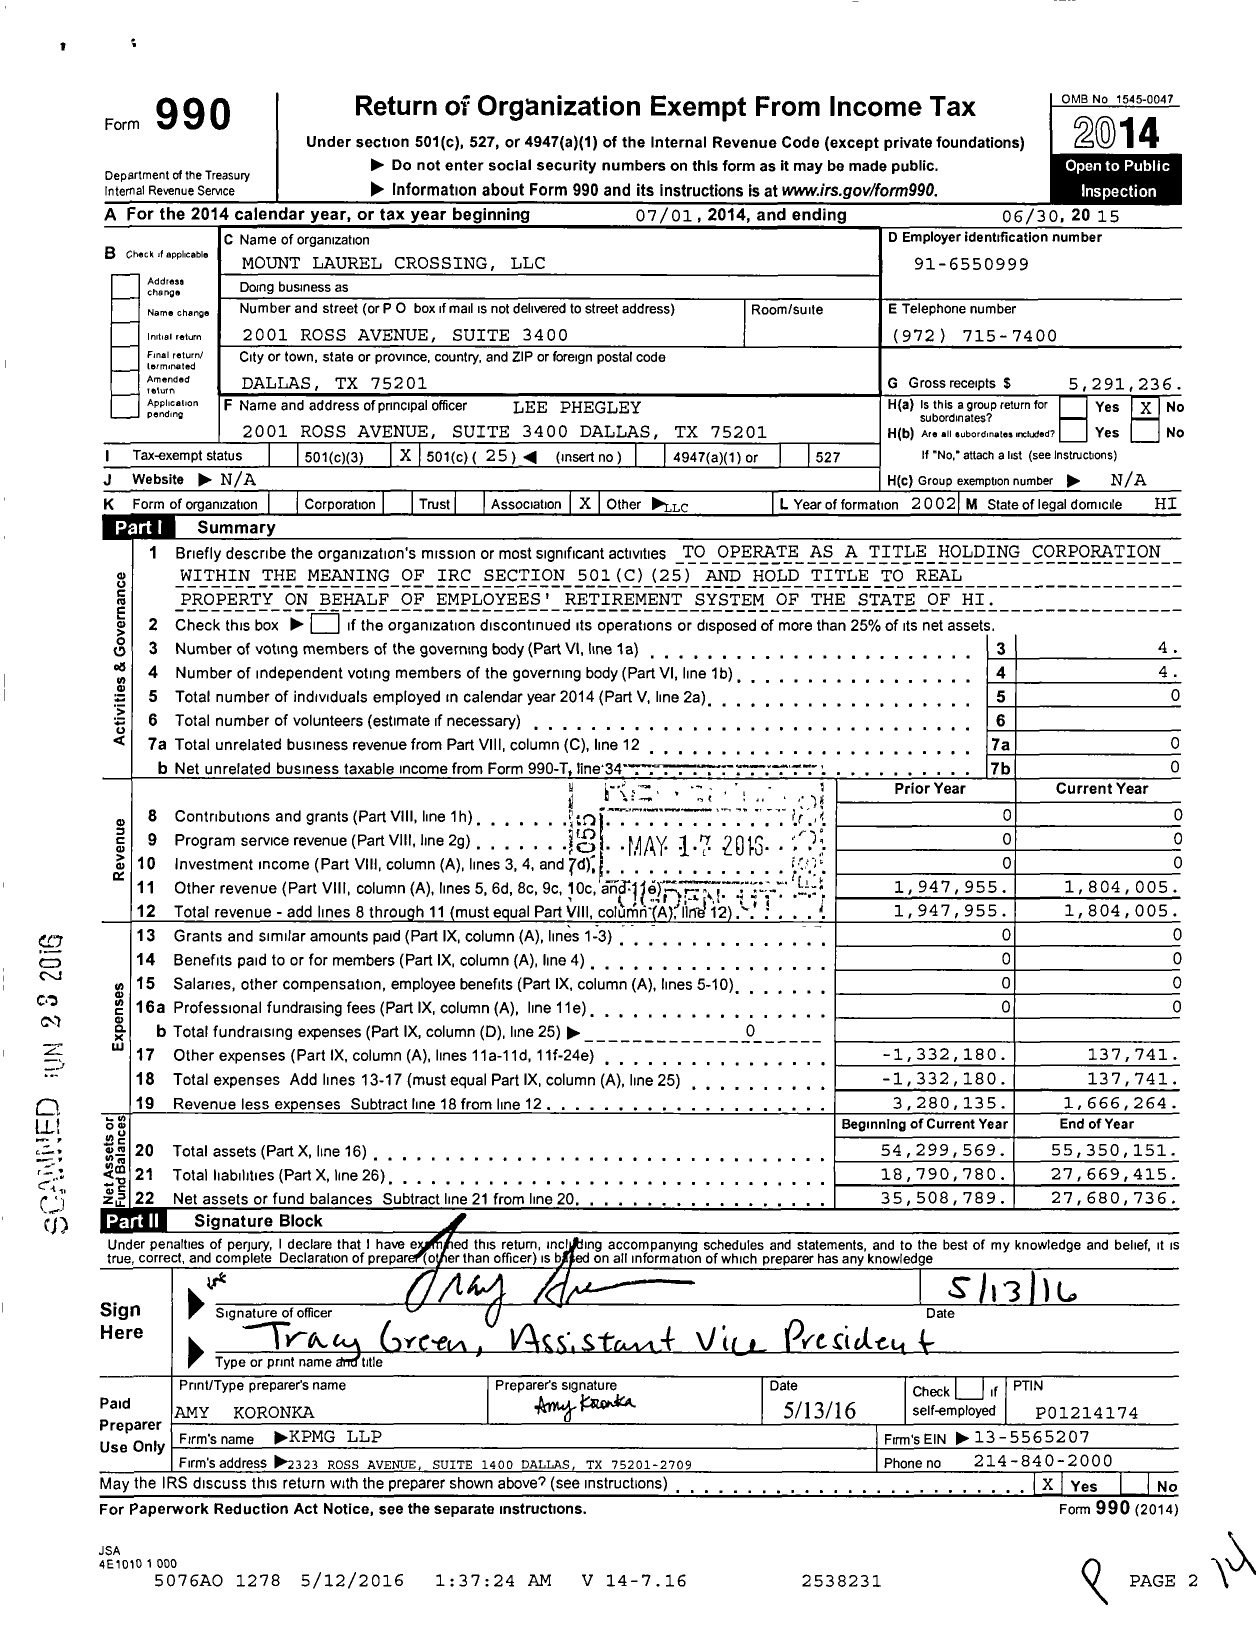 Image of first page of 2014 Form 990O for Mount Laurel Crossing (LLC)